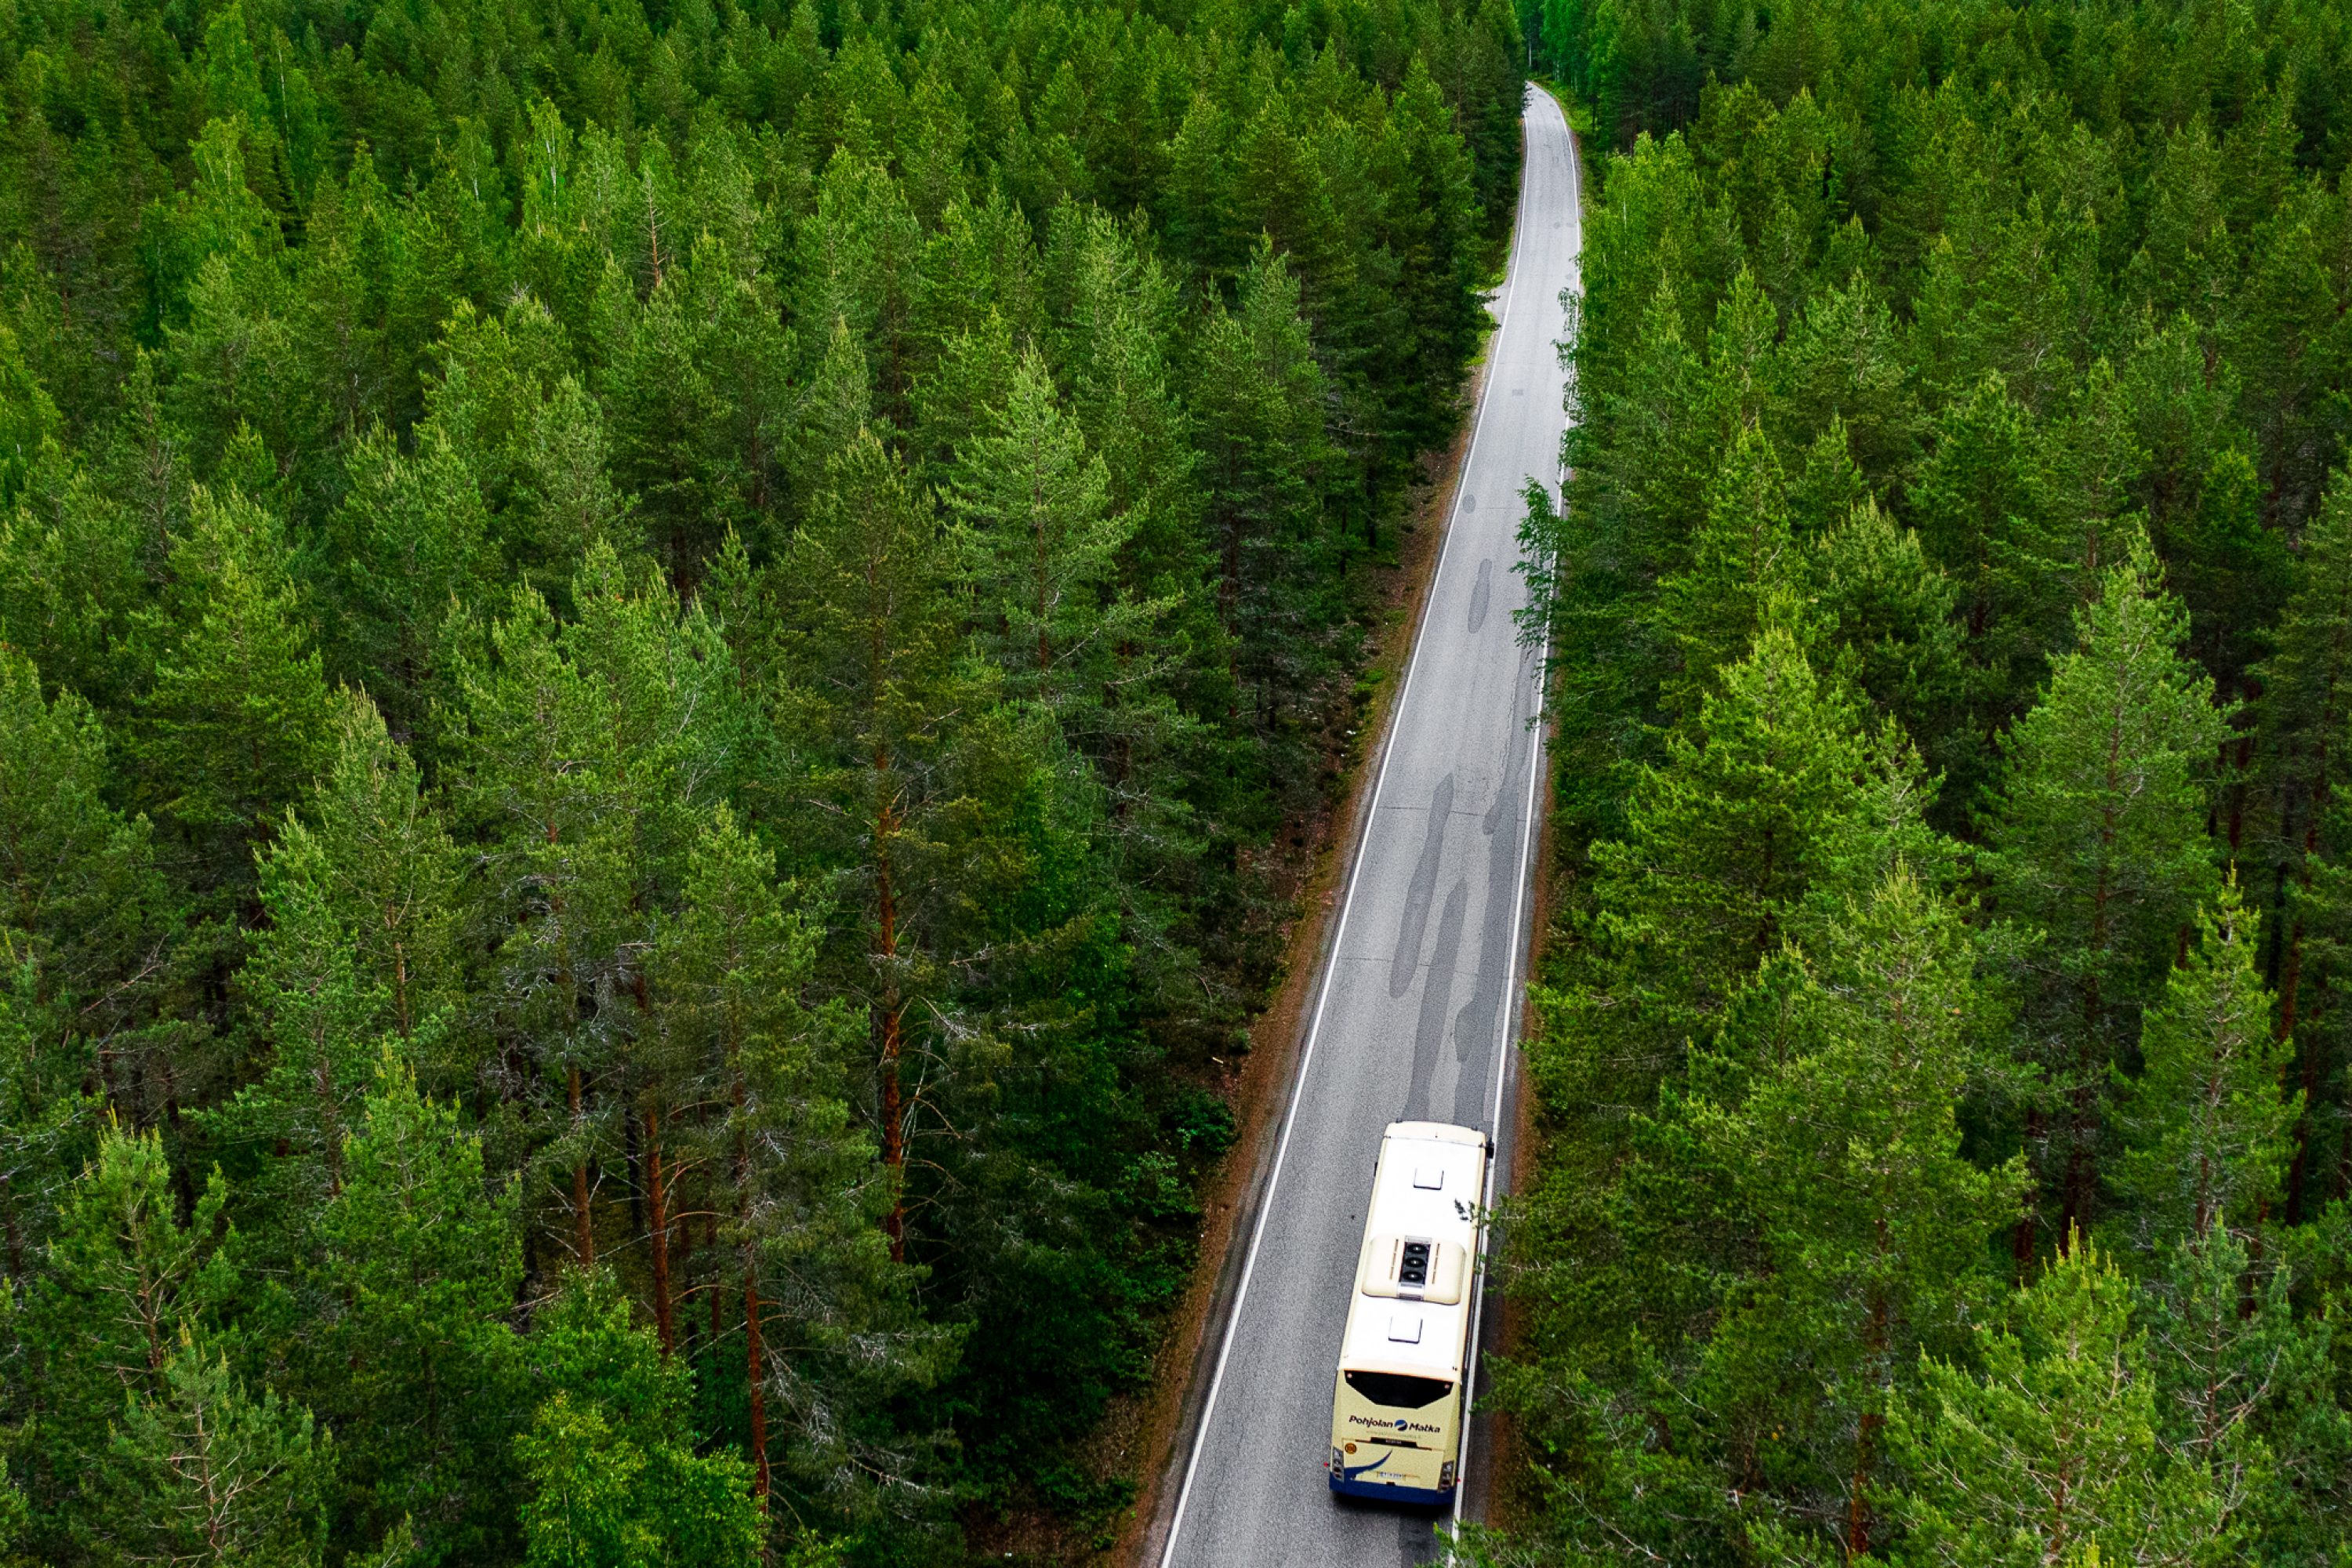 A bus driving along the road